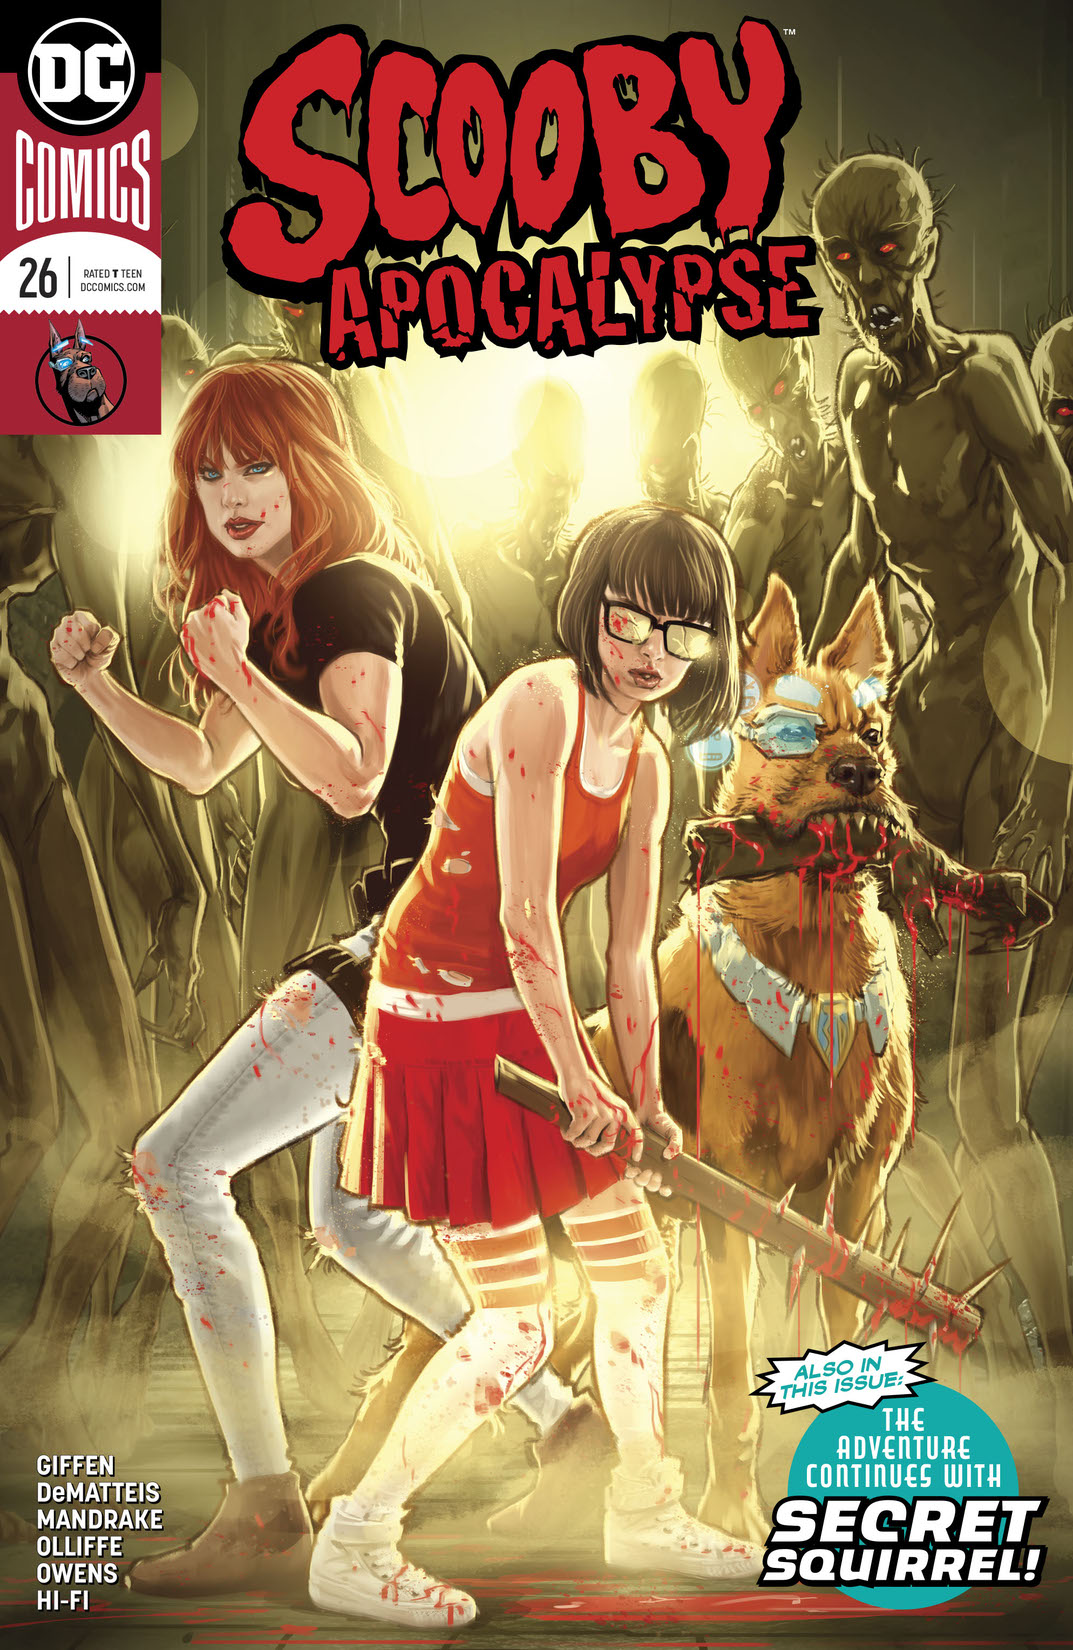 Scooby Apocalypse #26 preview images